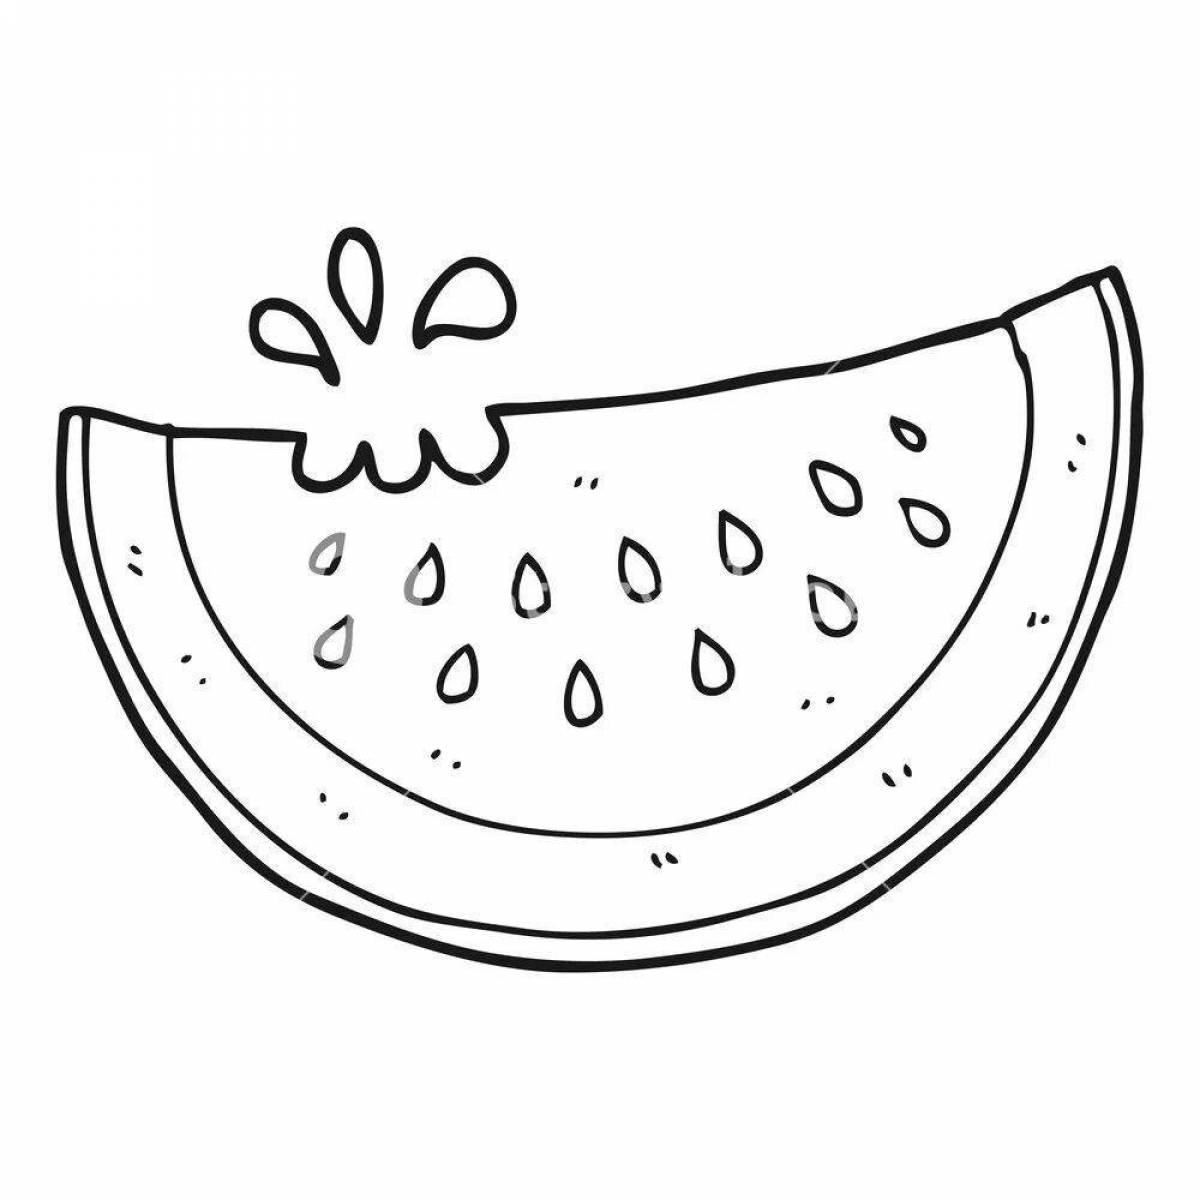 Adorable watermelon coloring book for kids